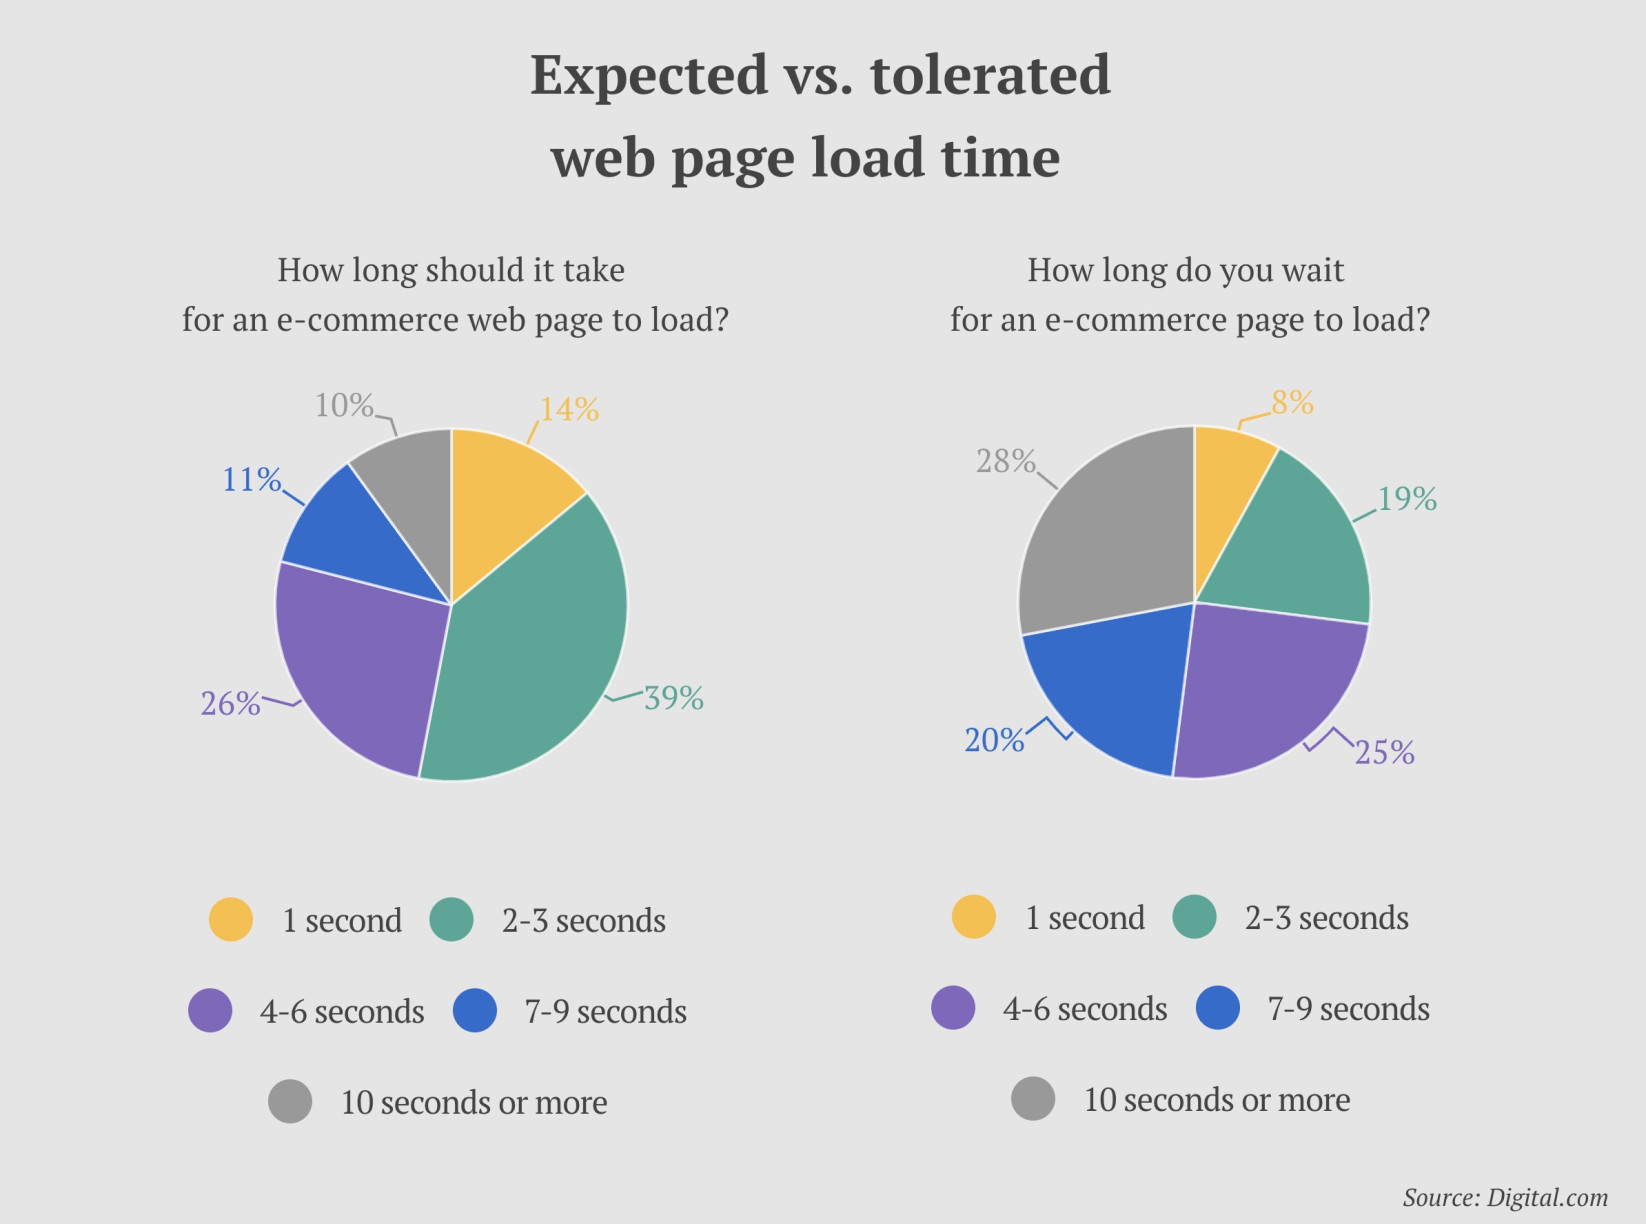 Infographic from Digital.com explaining how users tolerate page load